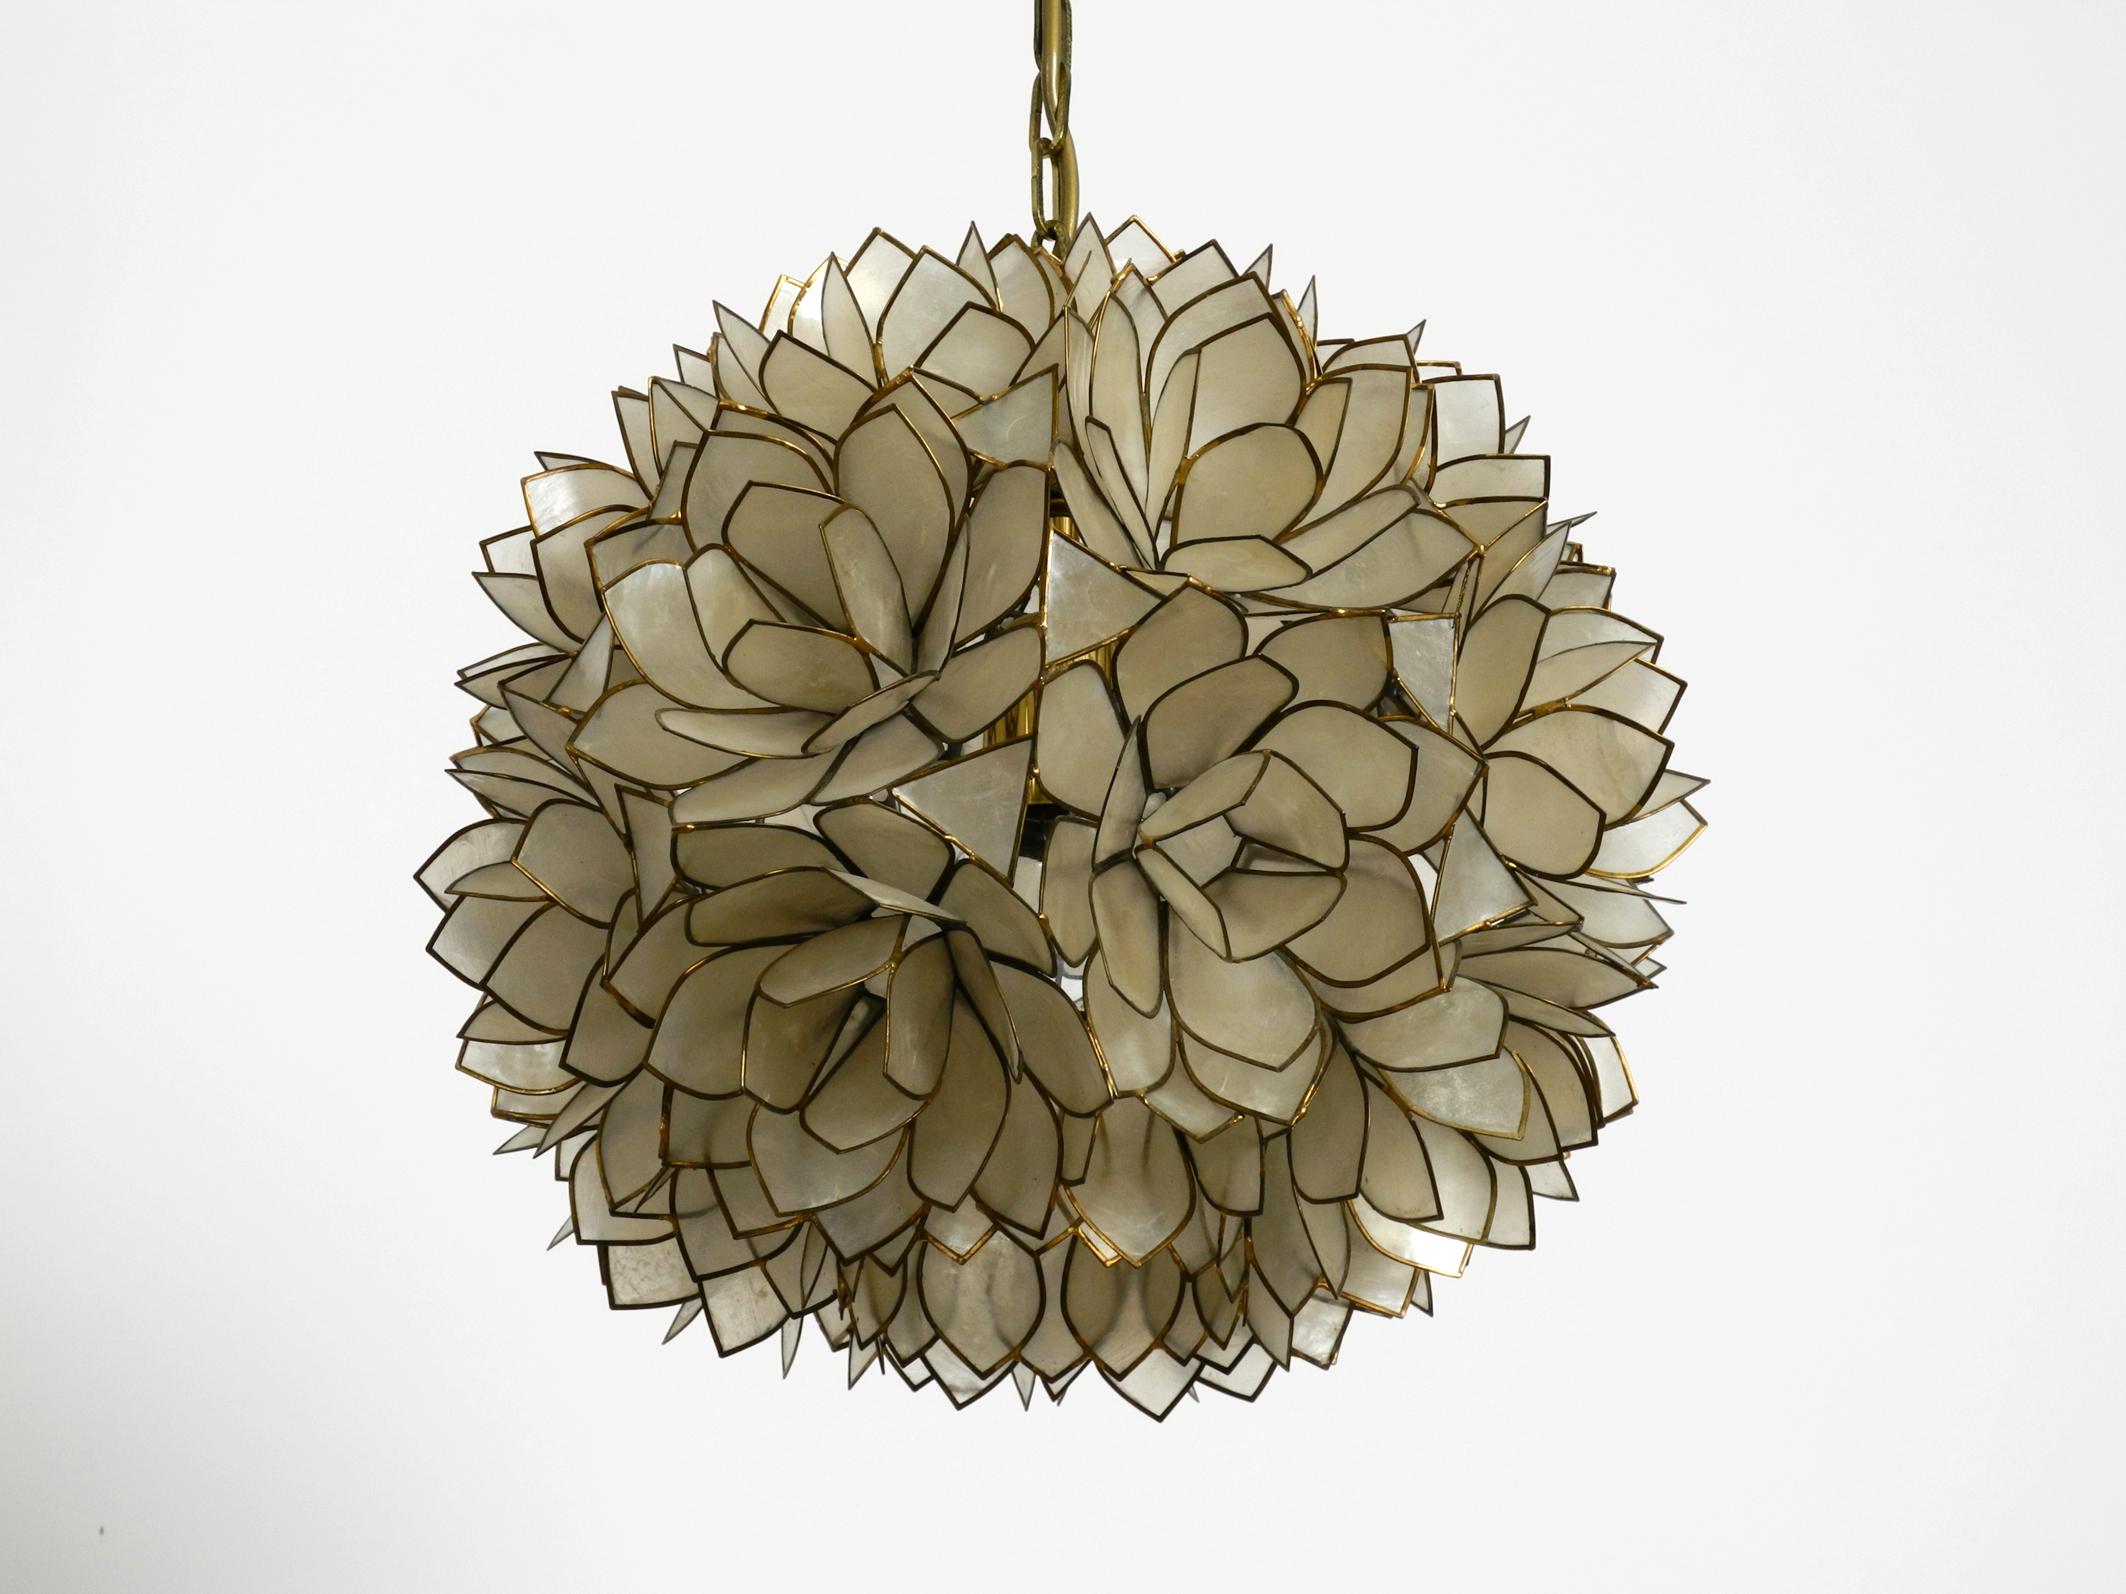 European 1970s Spherical Pendant Lamp Made of Mother of Pearl in the Look of a Flower